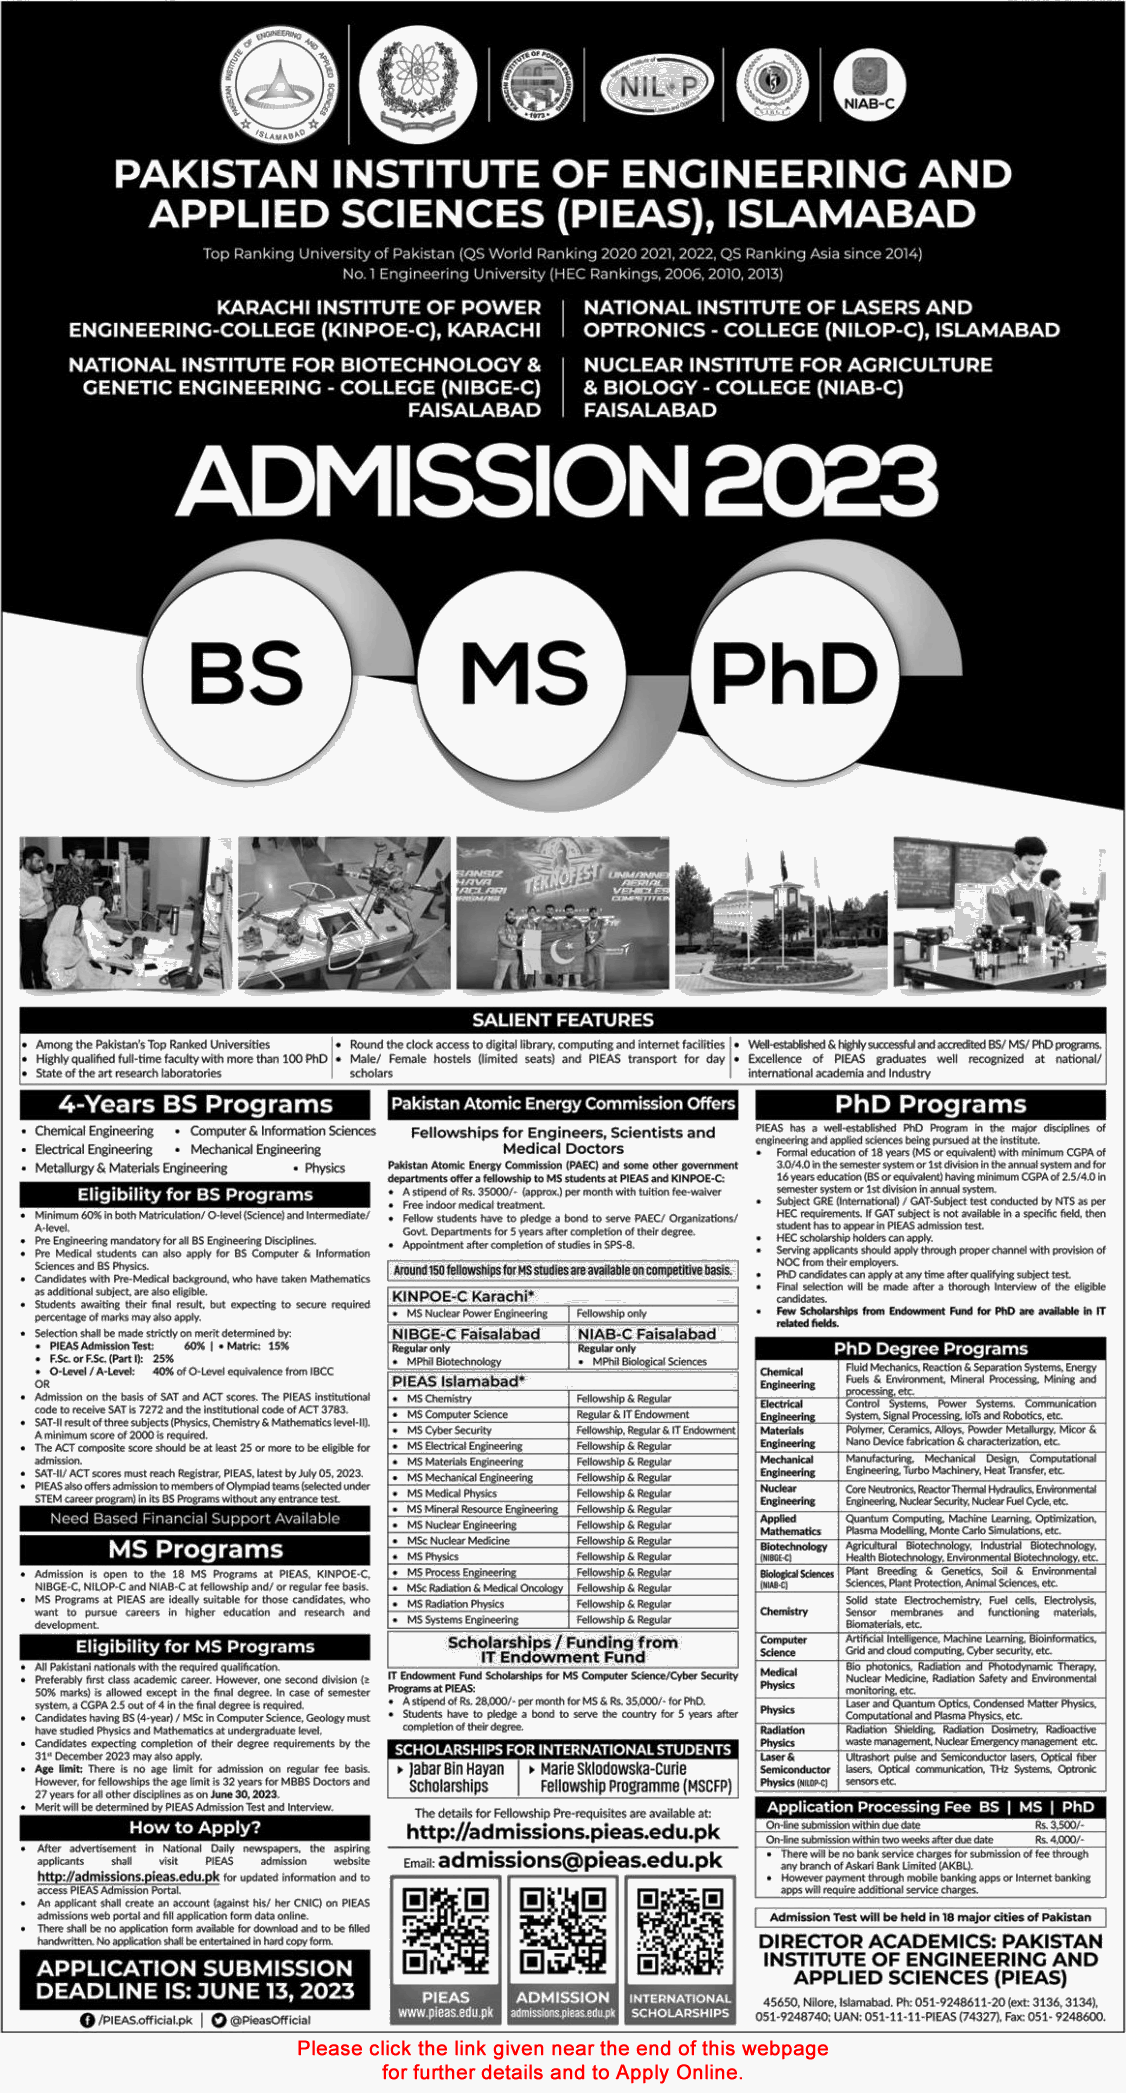 PIEAS Fellowships 2023 March MS / Postgraduate Programs for Engineers, Scientists & Doctors in PAEC KINPOE Apply Online Latest